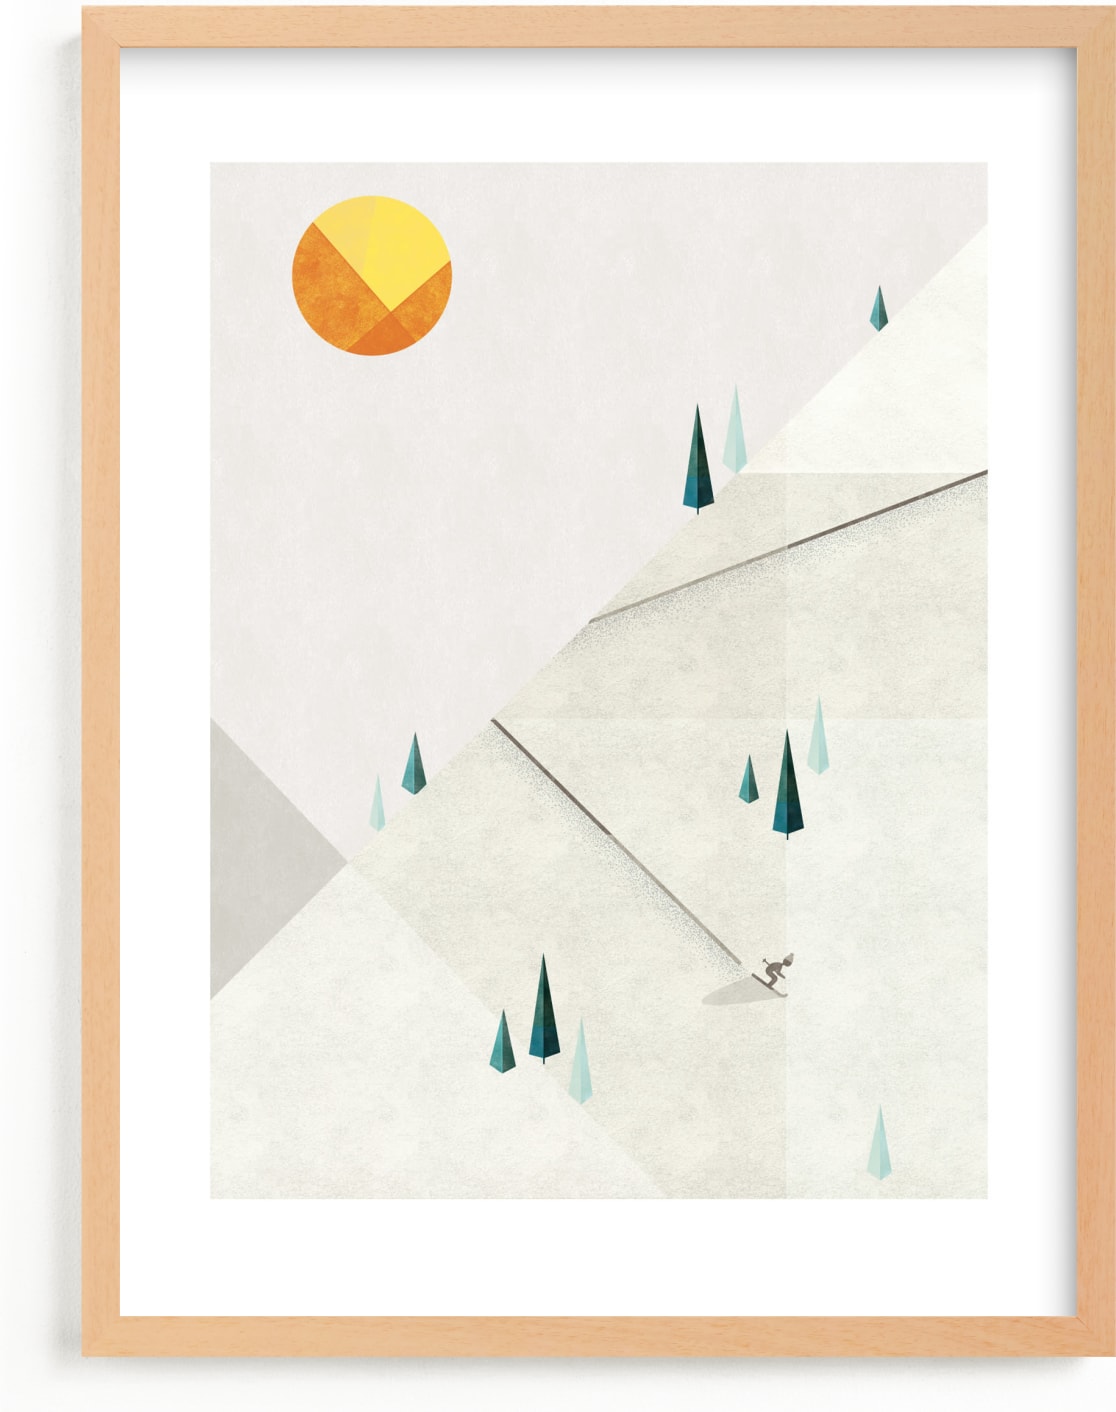 This is a white kids wall art by Robert and Stella called Mountain Adventure.